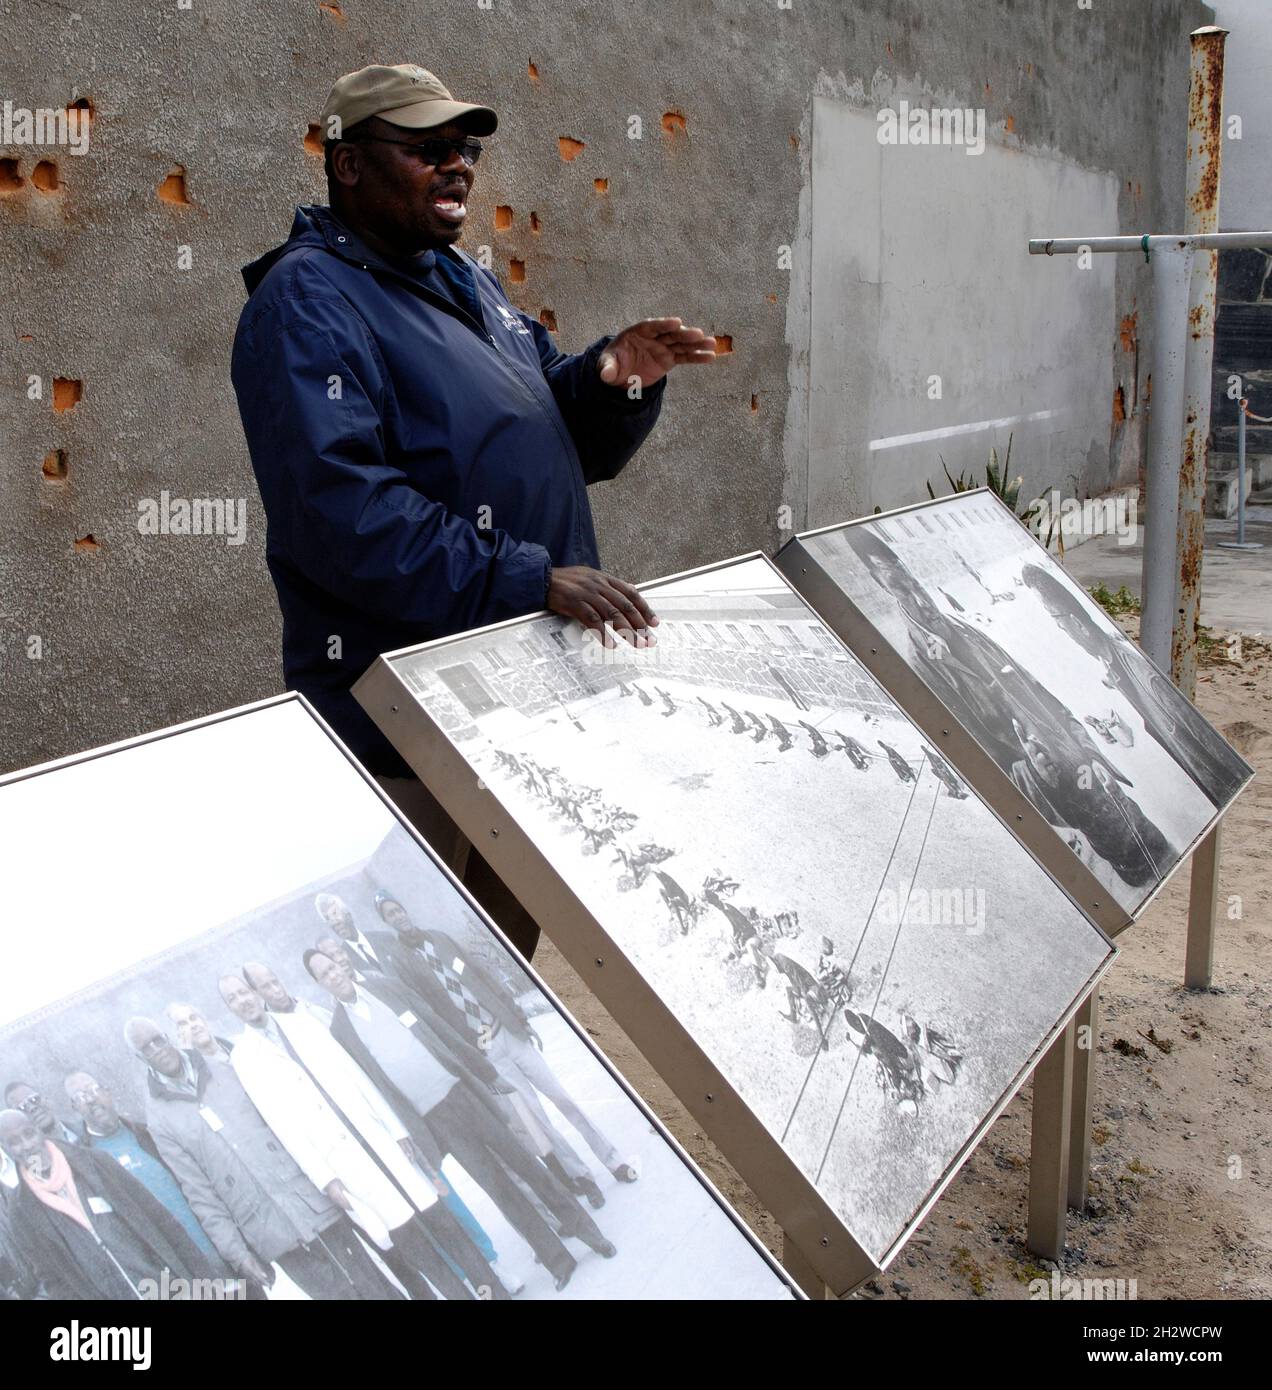 A former inmate now working as a tourist guide at The Prison on Robben Island, Cape Town, South Africa. Stock Photo